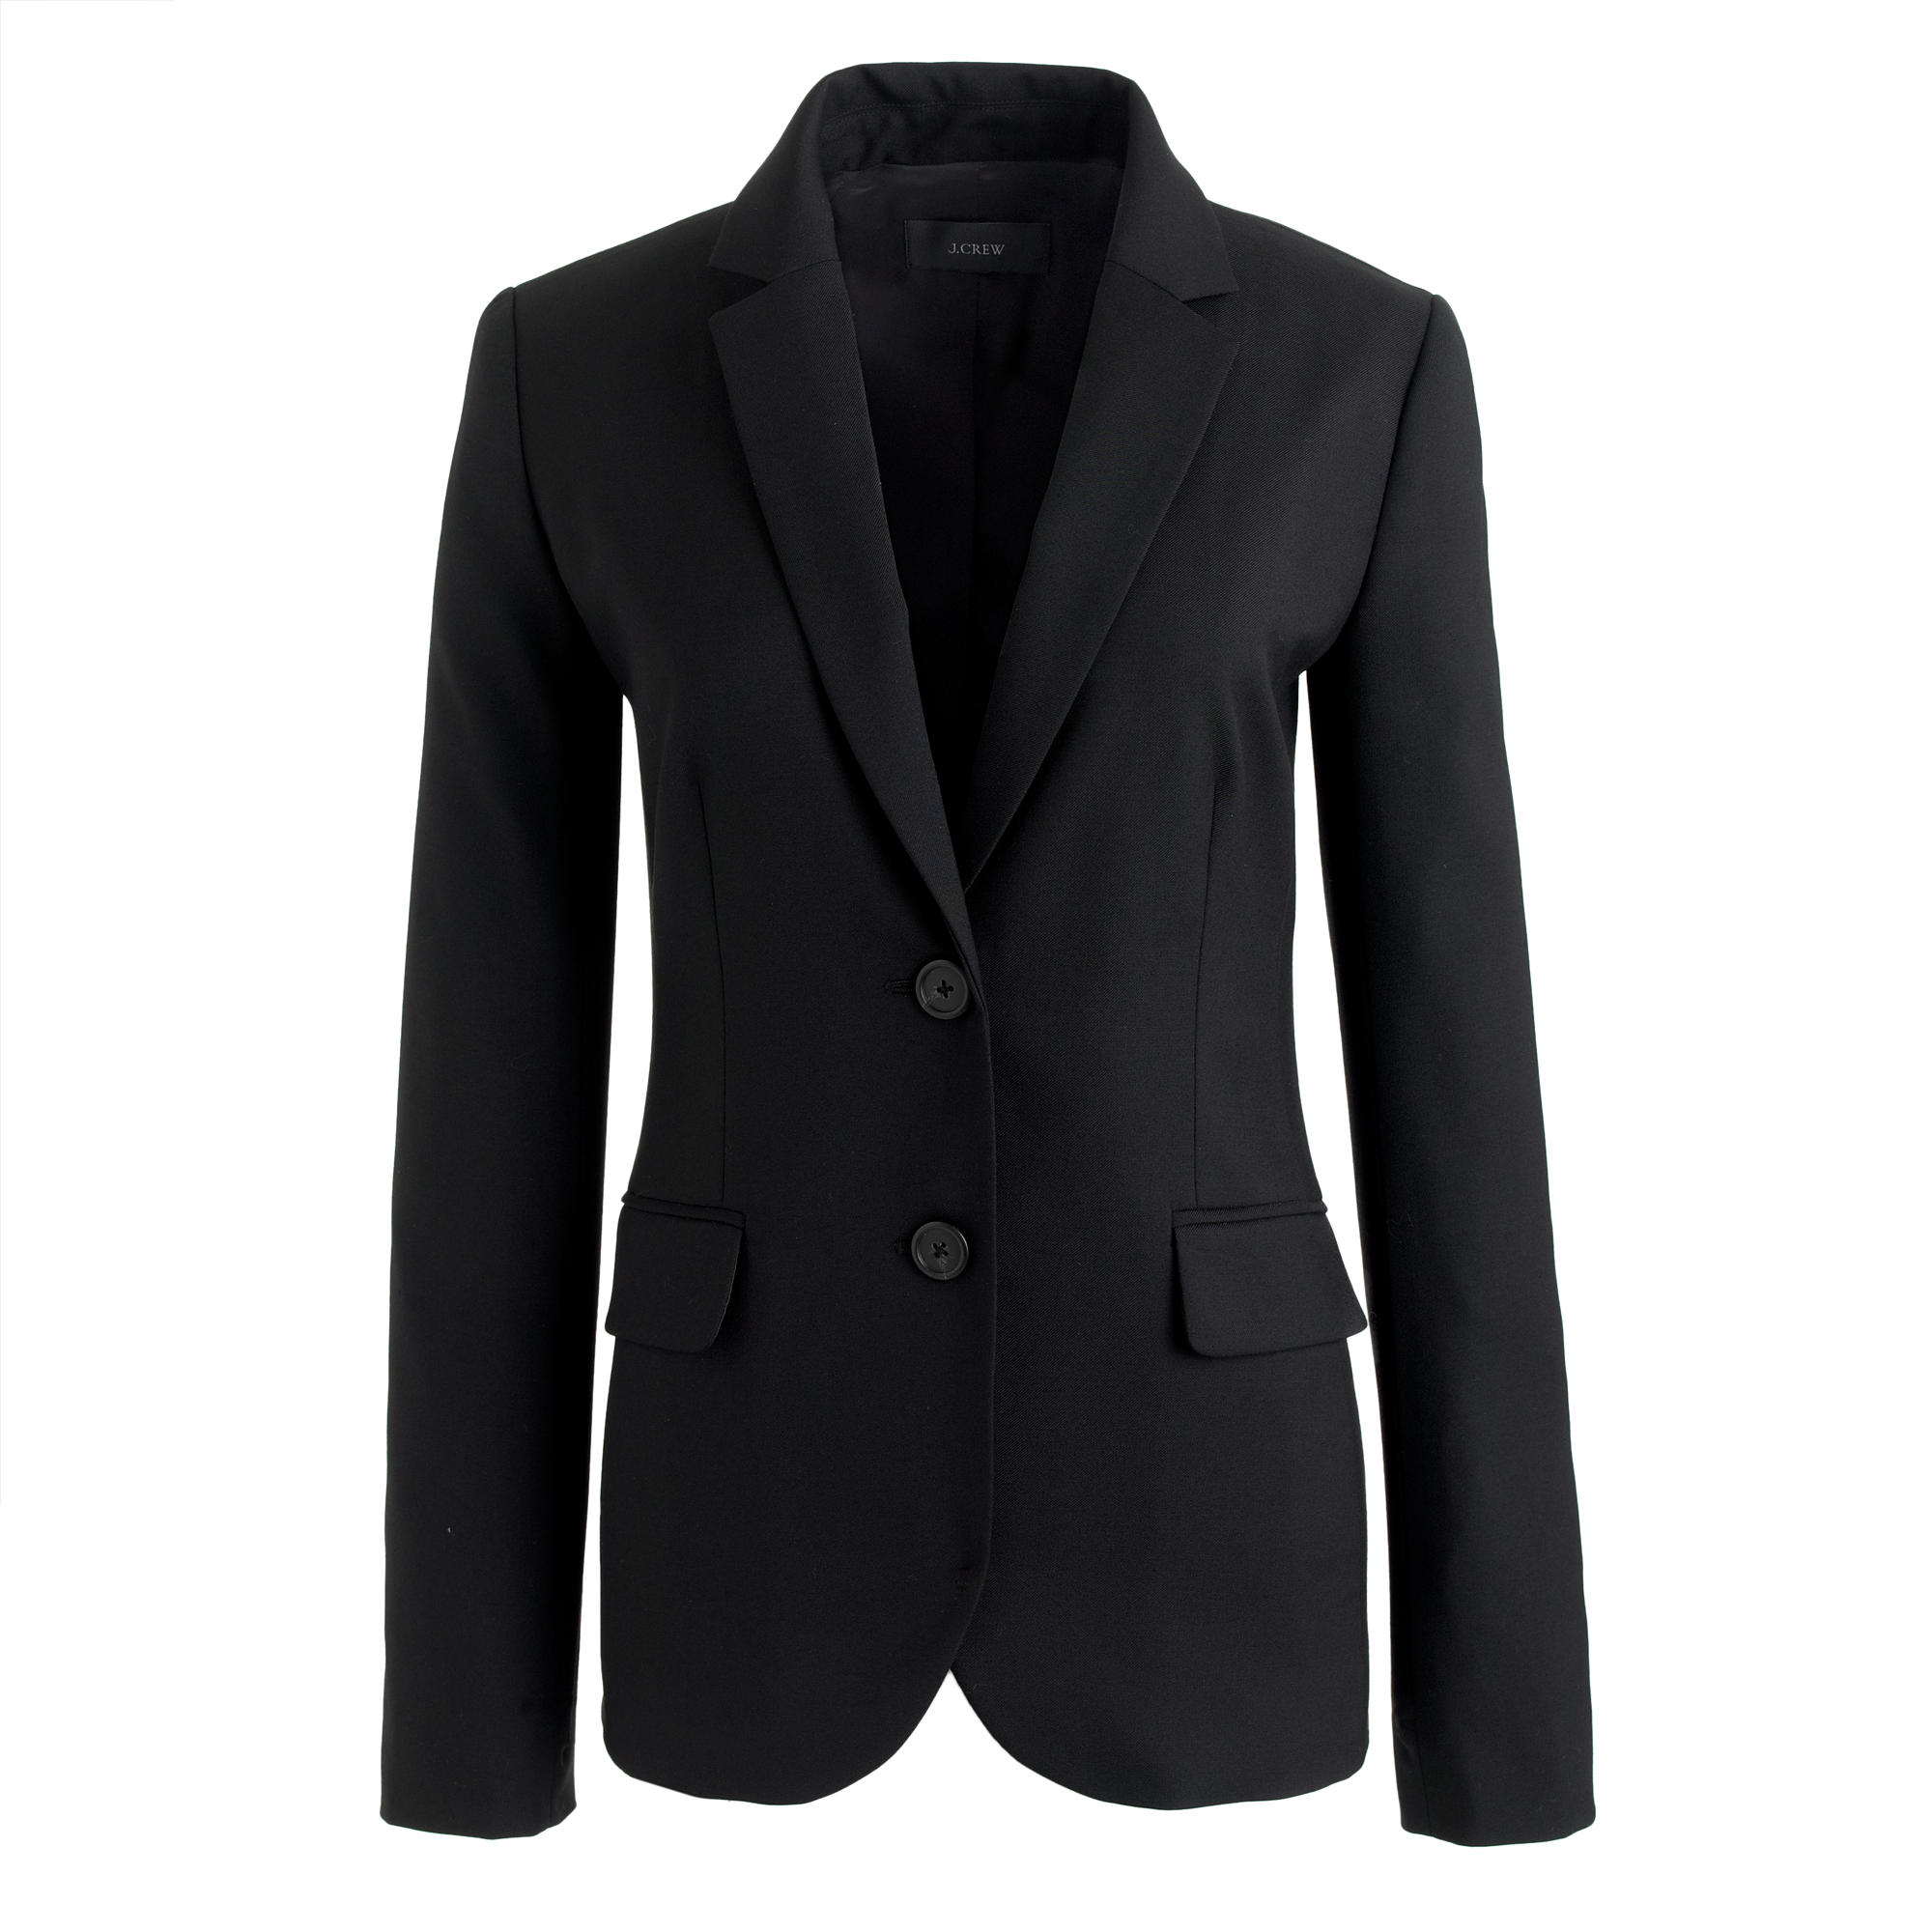 J.crew 1035 Two-button Jacket In Super 120s Wool in Black | Lyst